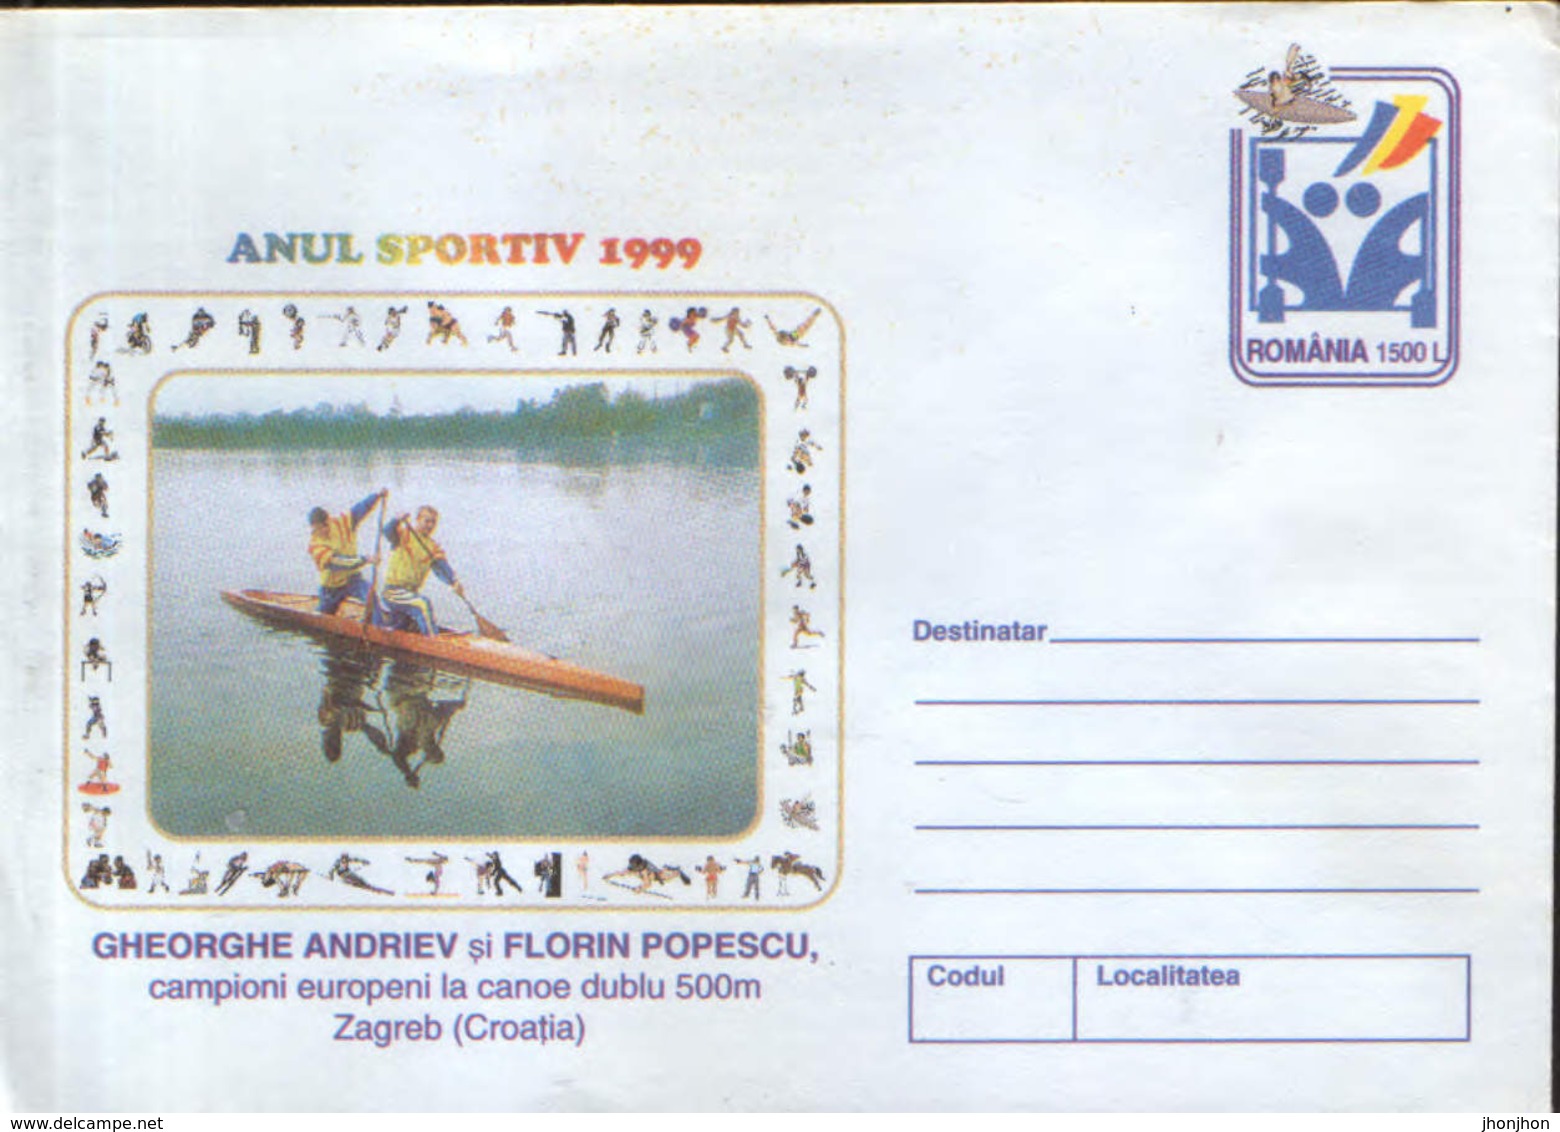 Romania - Postal Stationery Cover Unused 1999-Gh.Andriev And F.Popescu European Champions In The Double Canoe 500 Meters - Kanu